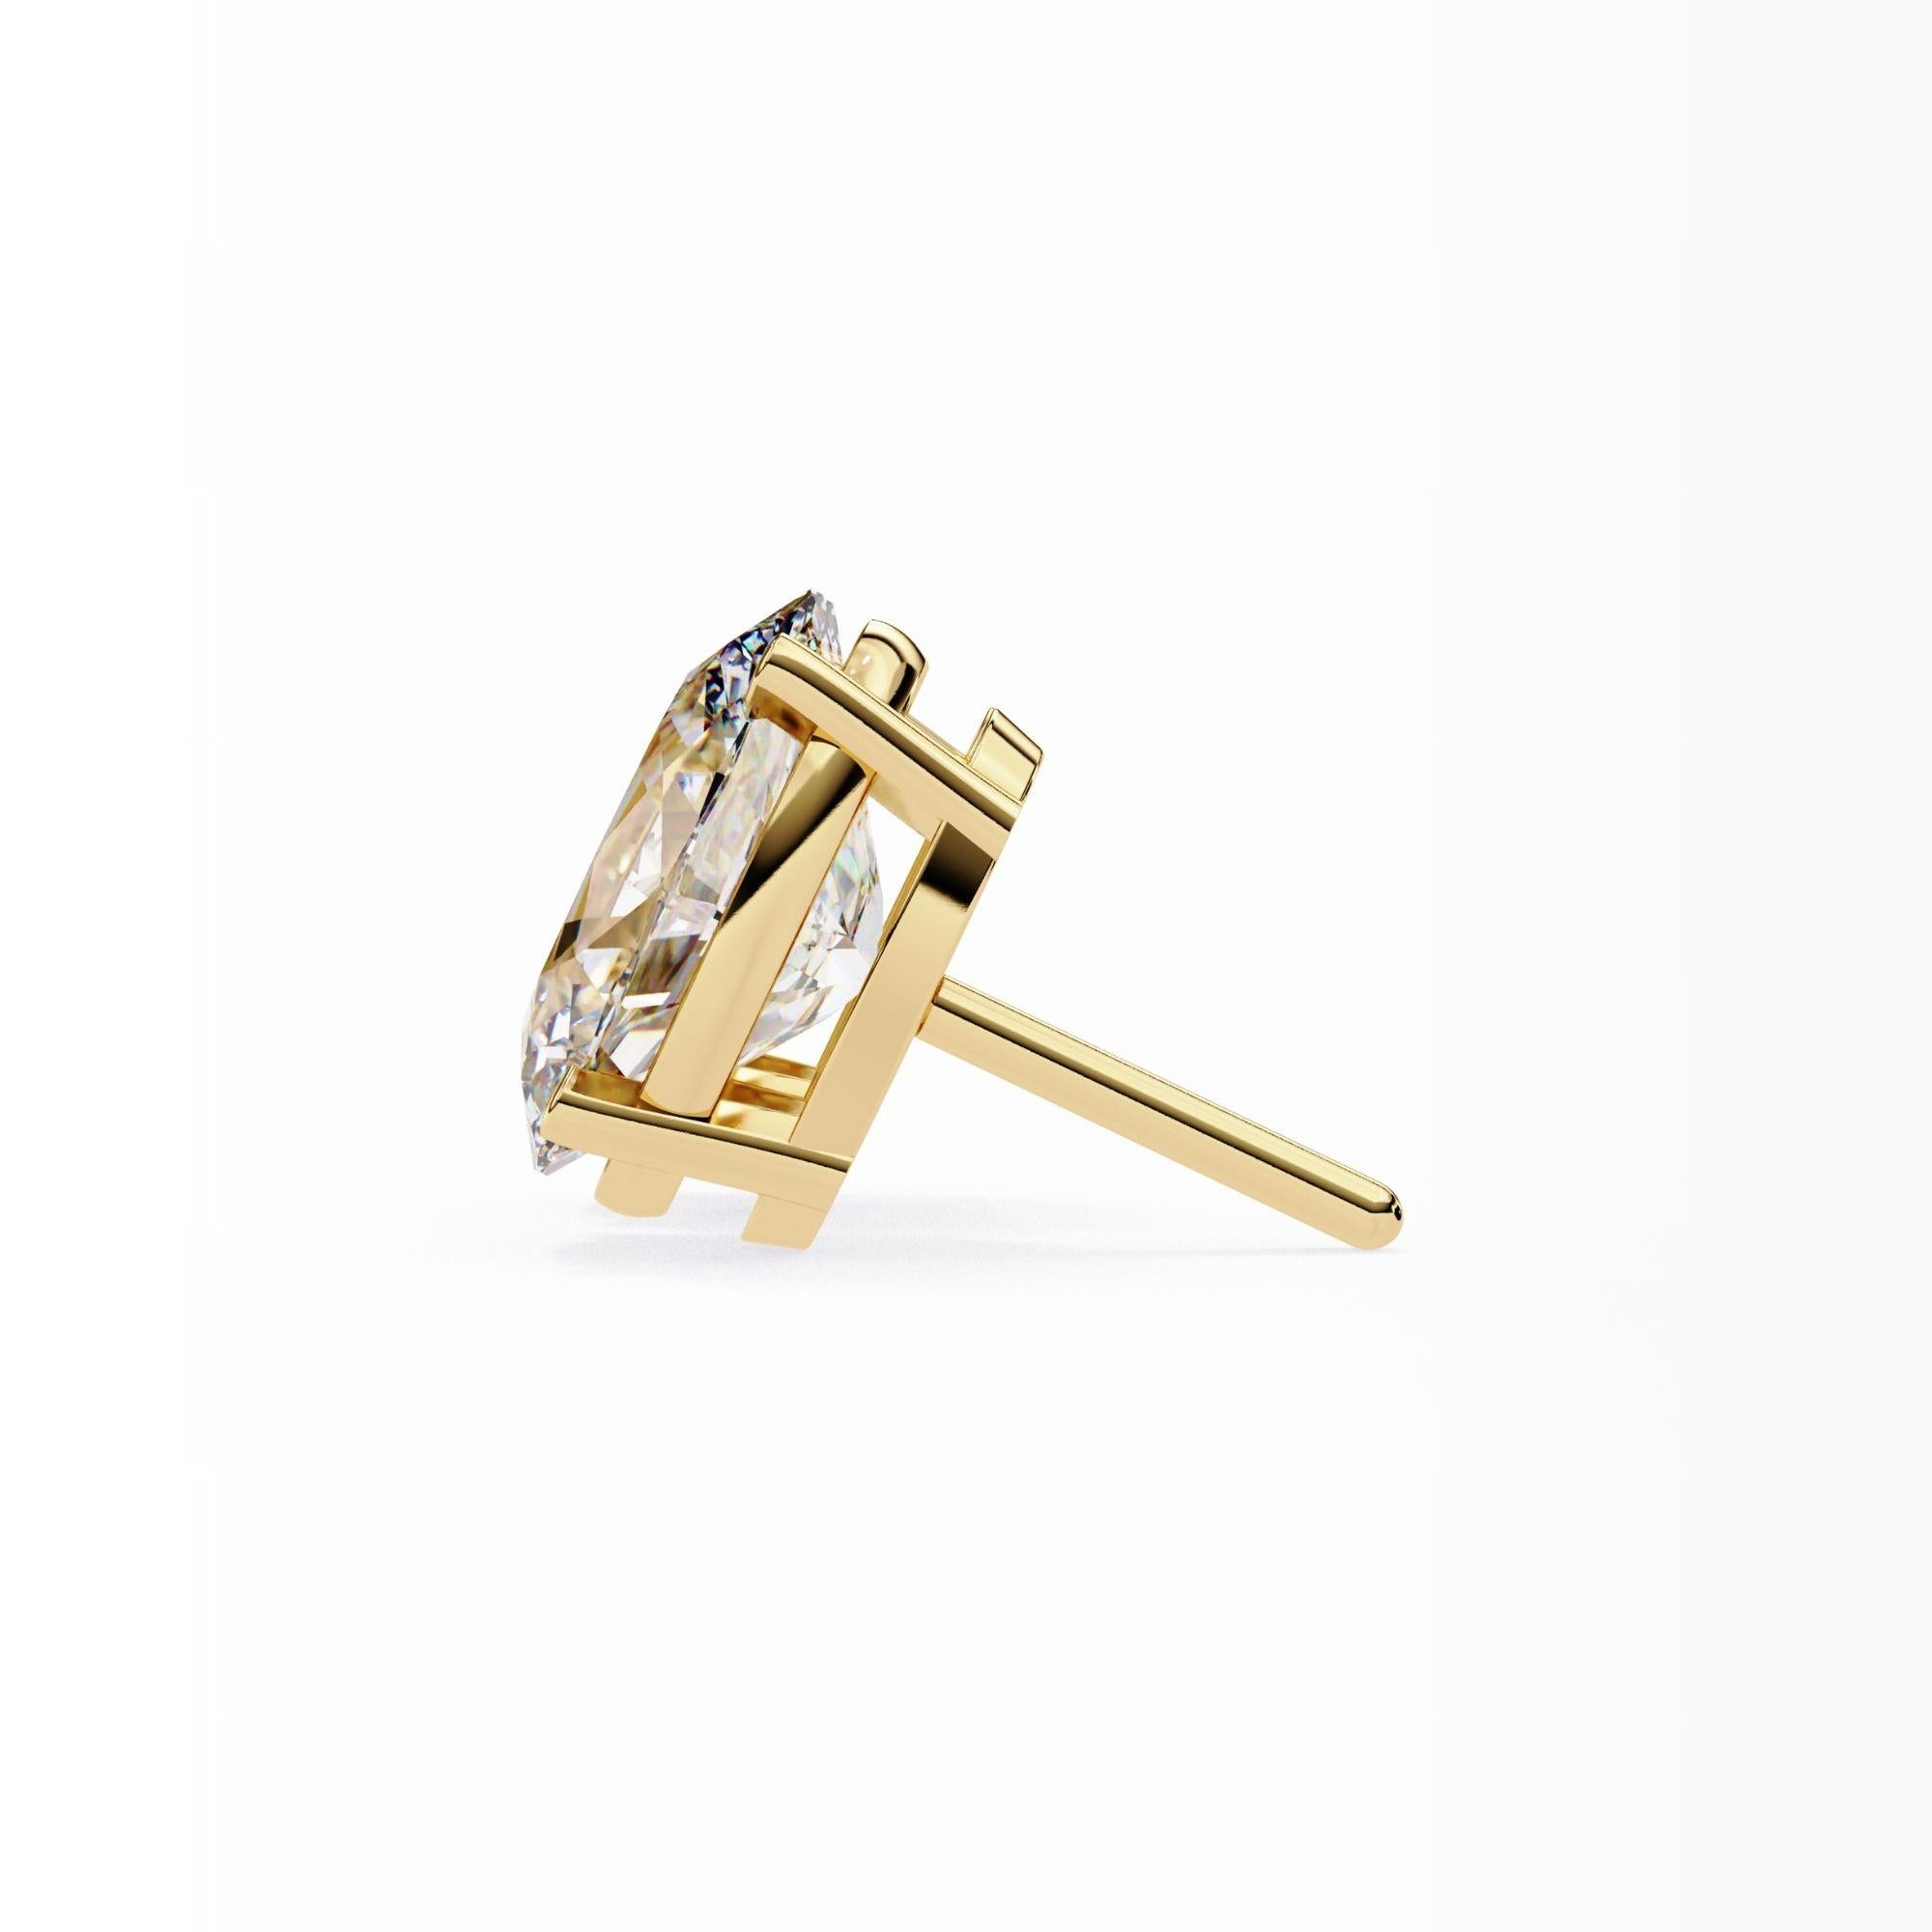 Women's or Men's Oval Diamond Studs, 1/2 Carats TW, 14K Solid Gold, Everyday Studs, Pushback For Sale